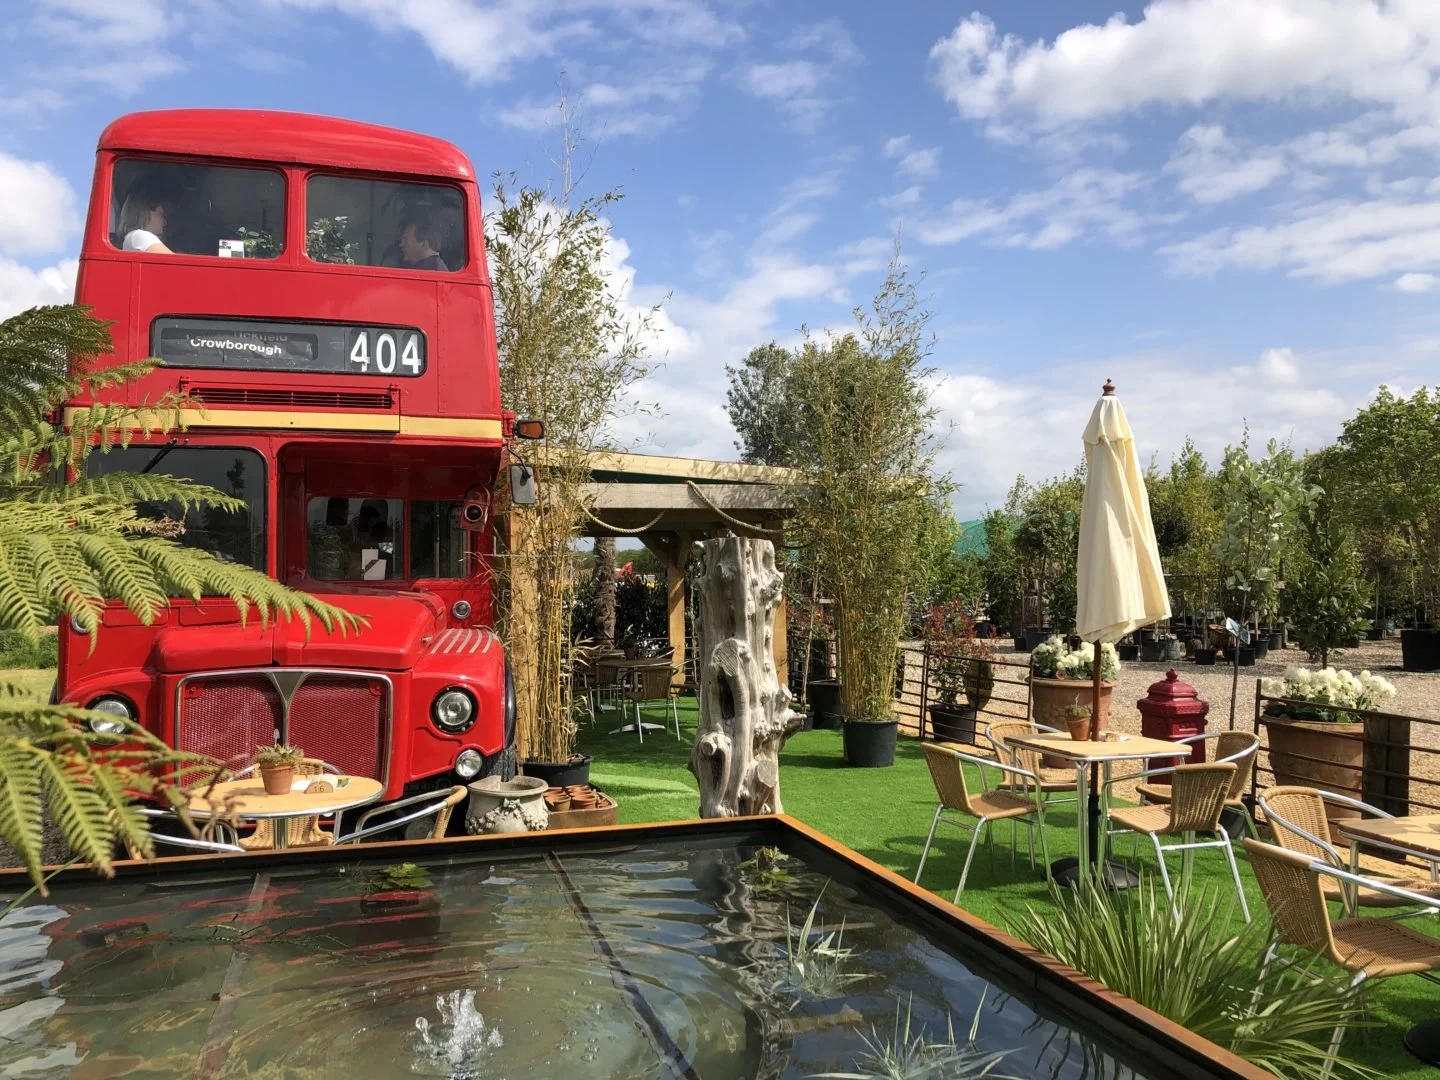 There is plenty of seating on the bus inside upstairs and a fully equipped kitchen. The bus also has a stunning outside space in the sunshine surrounded by the gorgeous Essex countryside. Tables and chairs are laced with potted plants whilst horses graze in the distance.